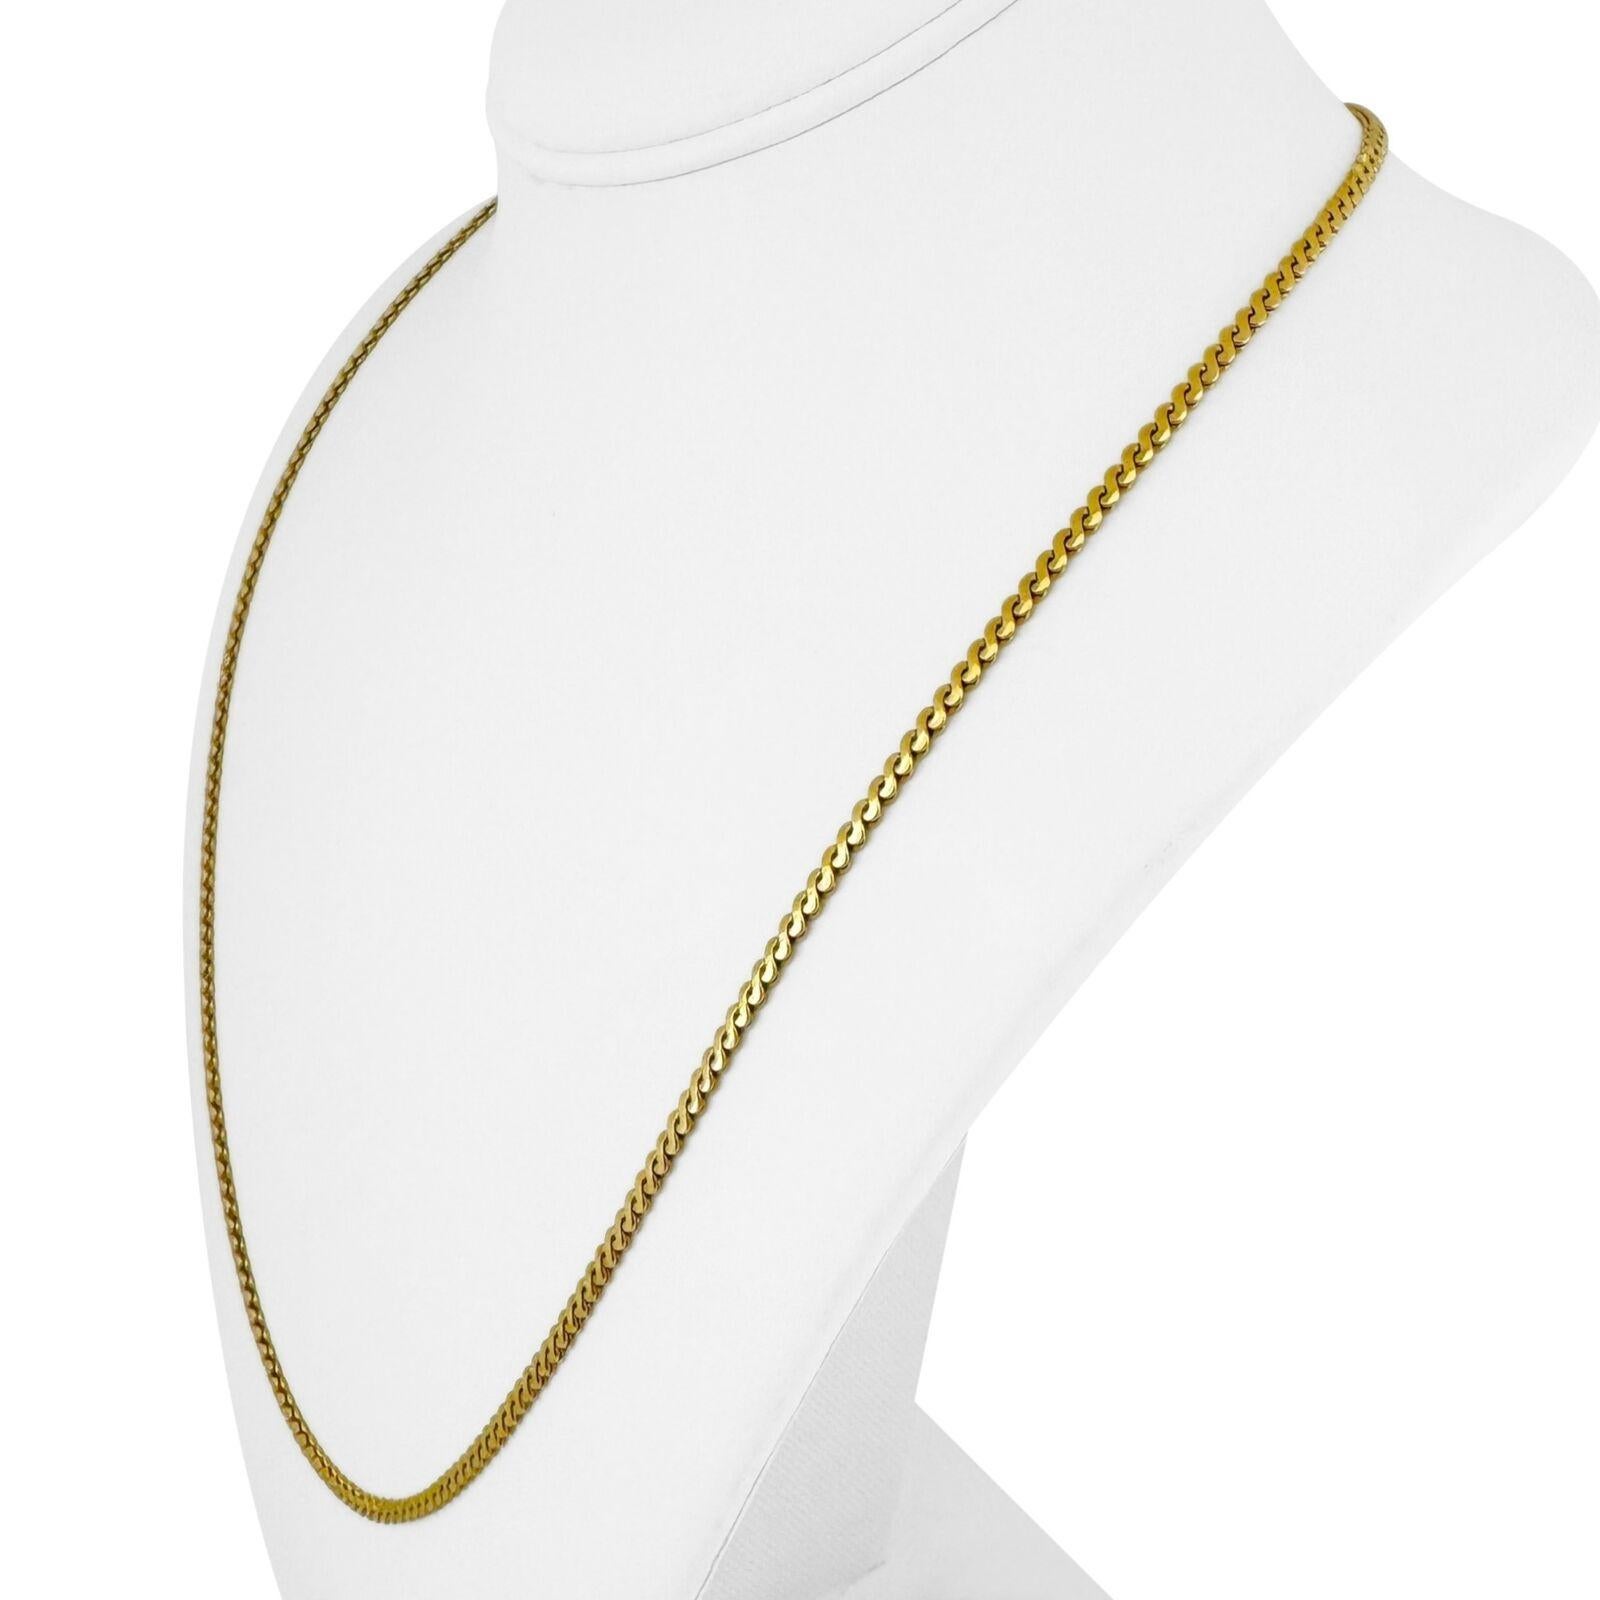 18k Yellow Gold 20.7g Solid 2.5mm Serpentine Link Chain Necklace Italy 23.5